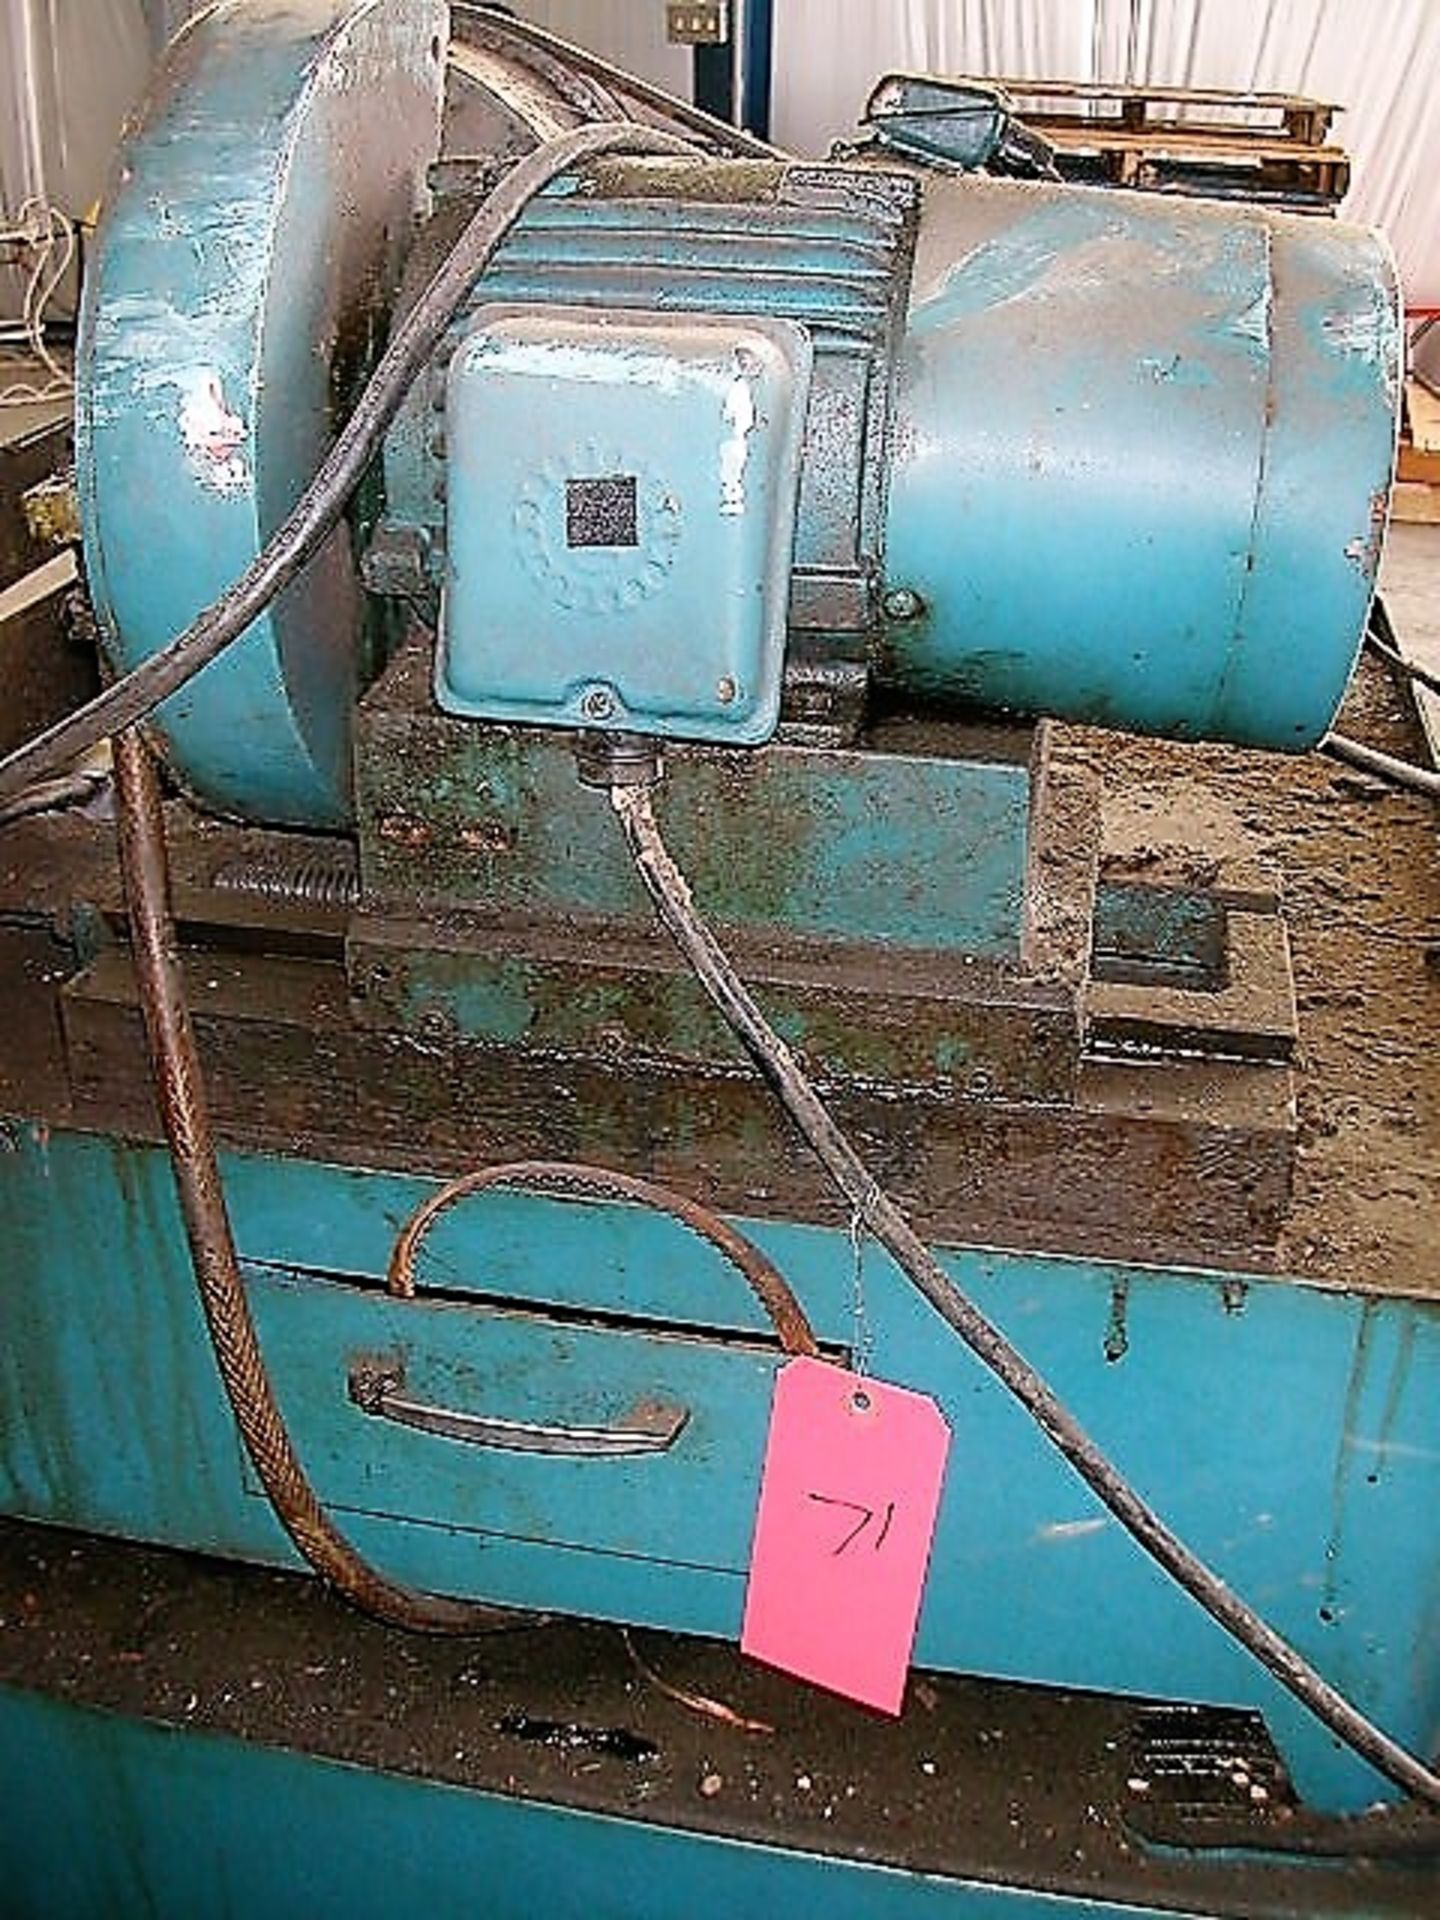 Am-Sol Tool Grinder with Cabinet - Image 3 of 3